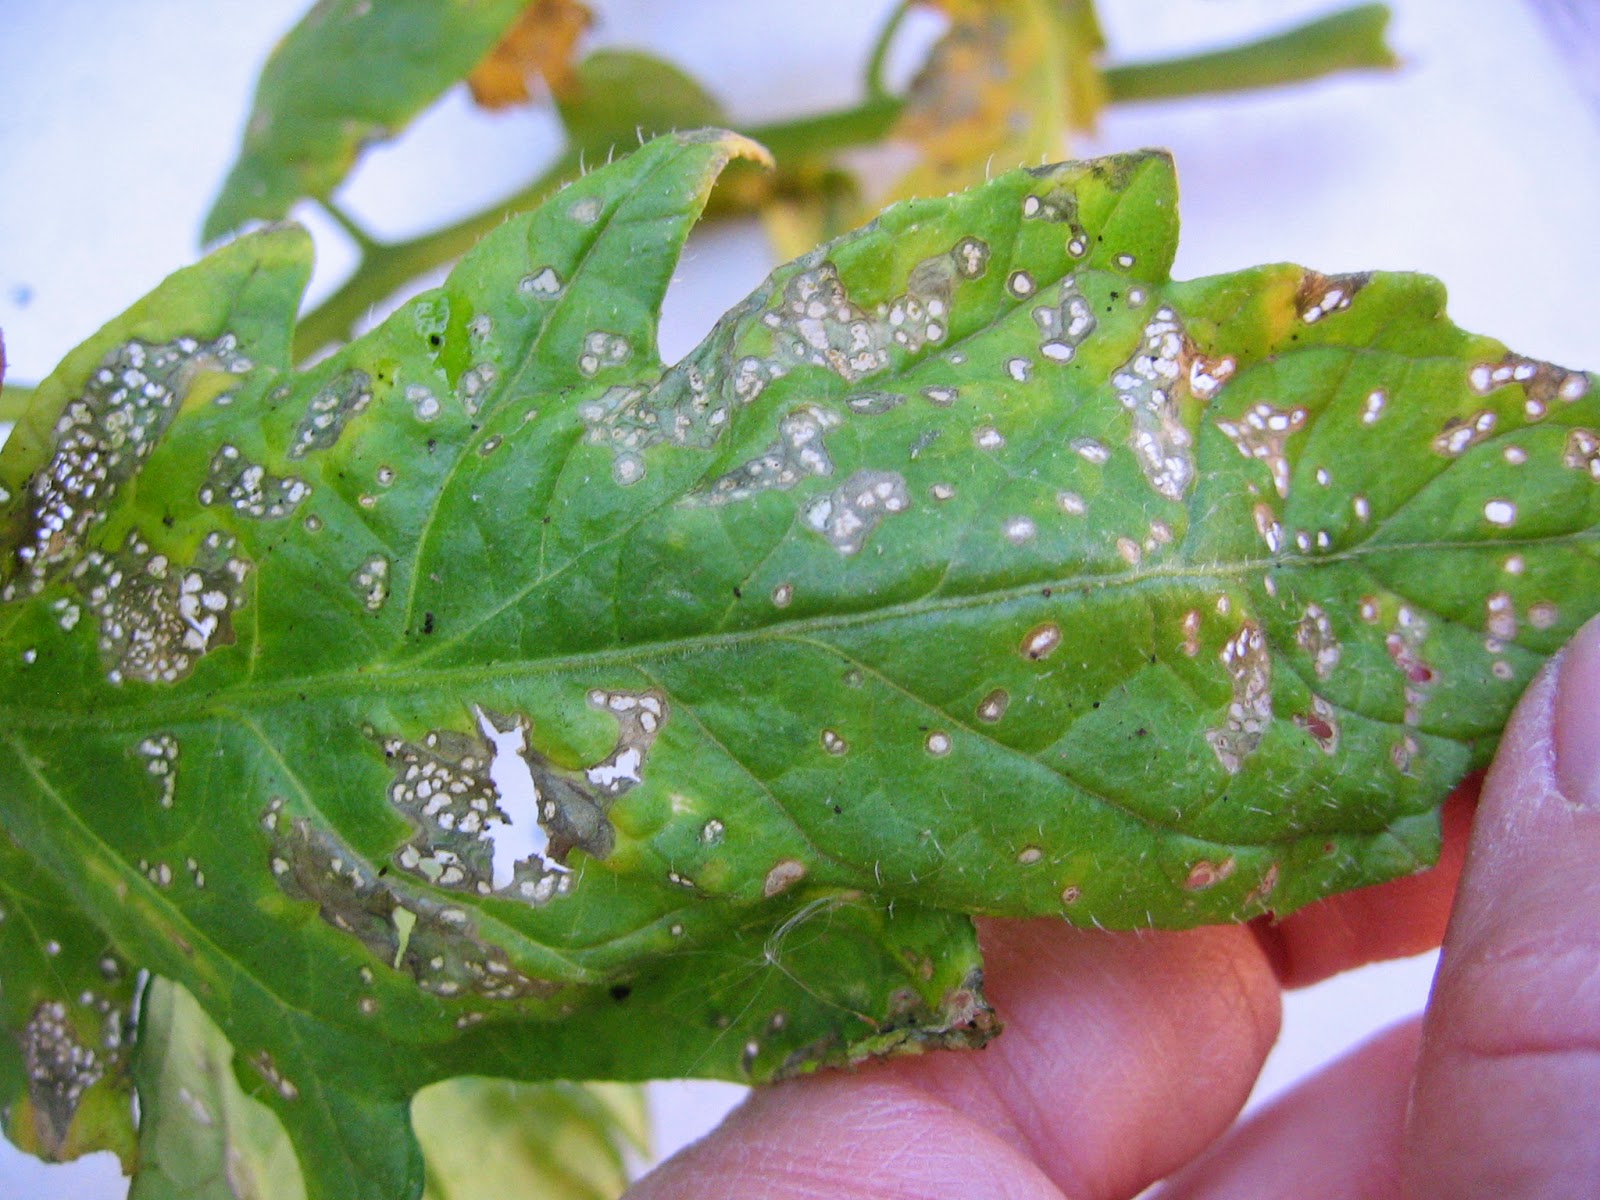 Xtremehorticulture of the Desert: Black Spots on Tomato Leaves May Be Septoria